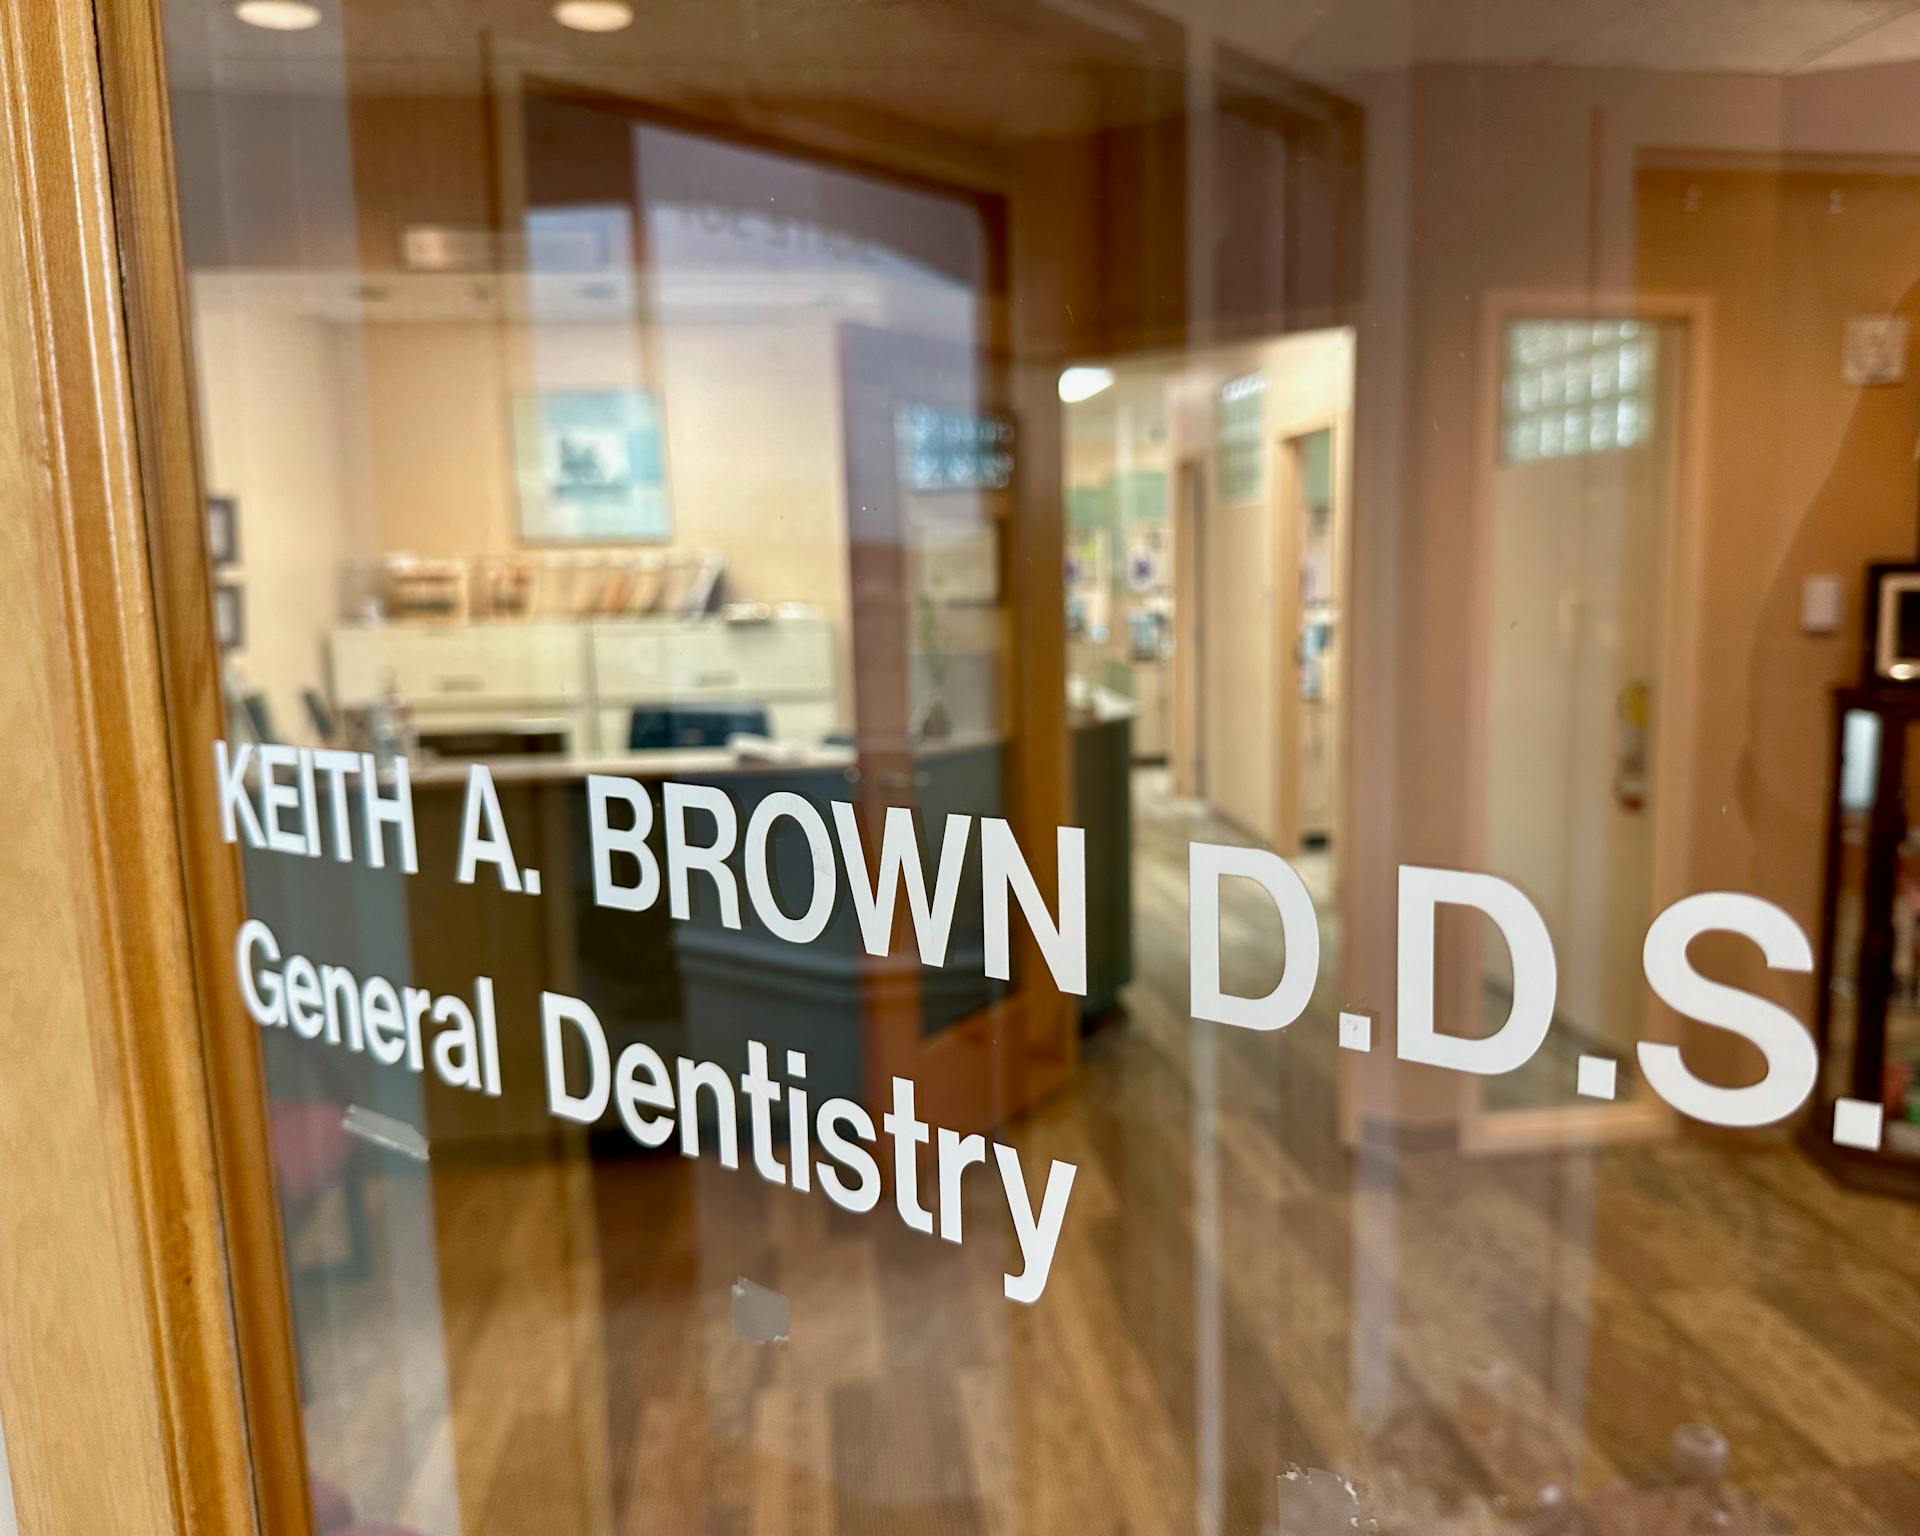 Dr. Keith A. Brown DDS, FAGD, standing with arms crossed in his office at 1295 Rickert Drive, 3rd floor, Naperville, IL, while a staff member is seated at a desk in the background.